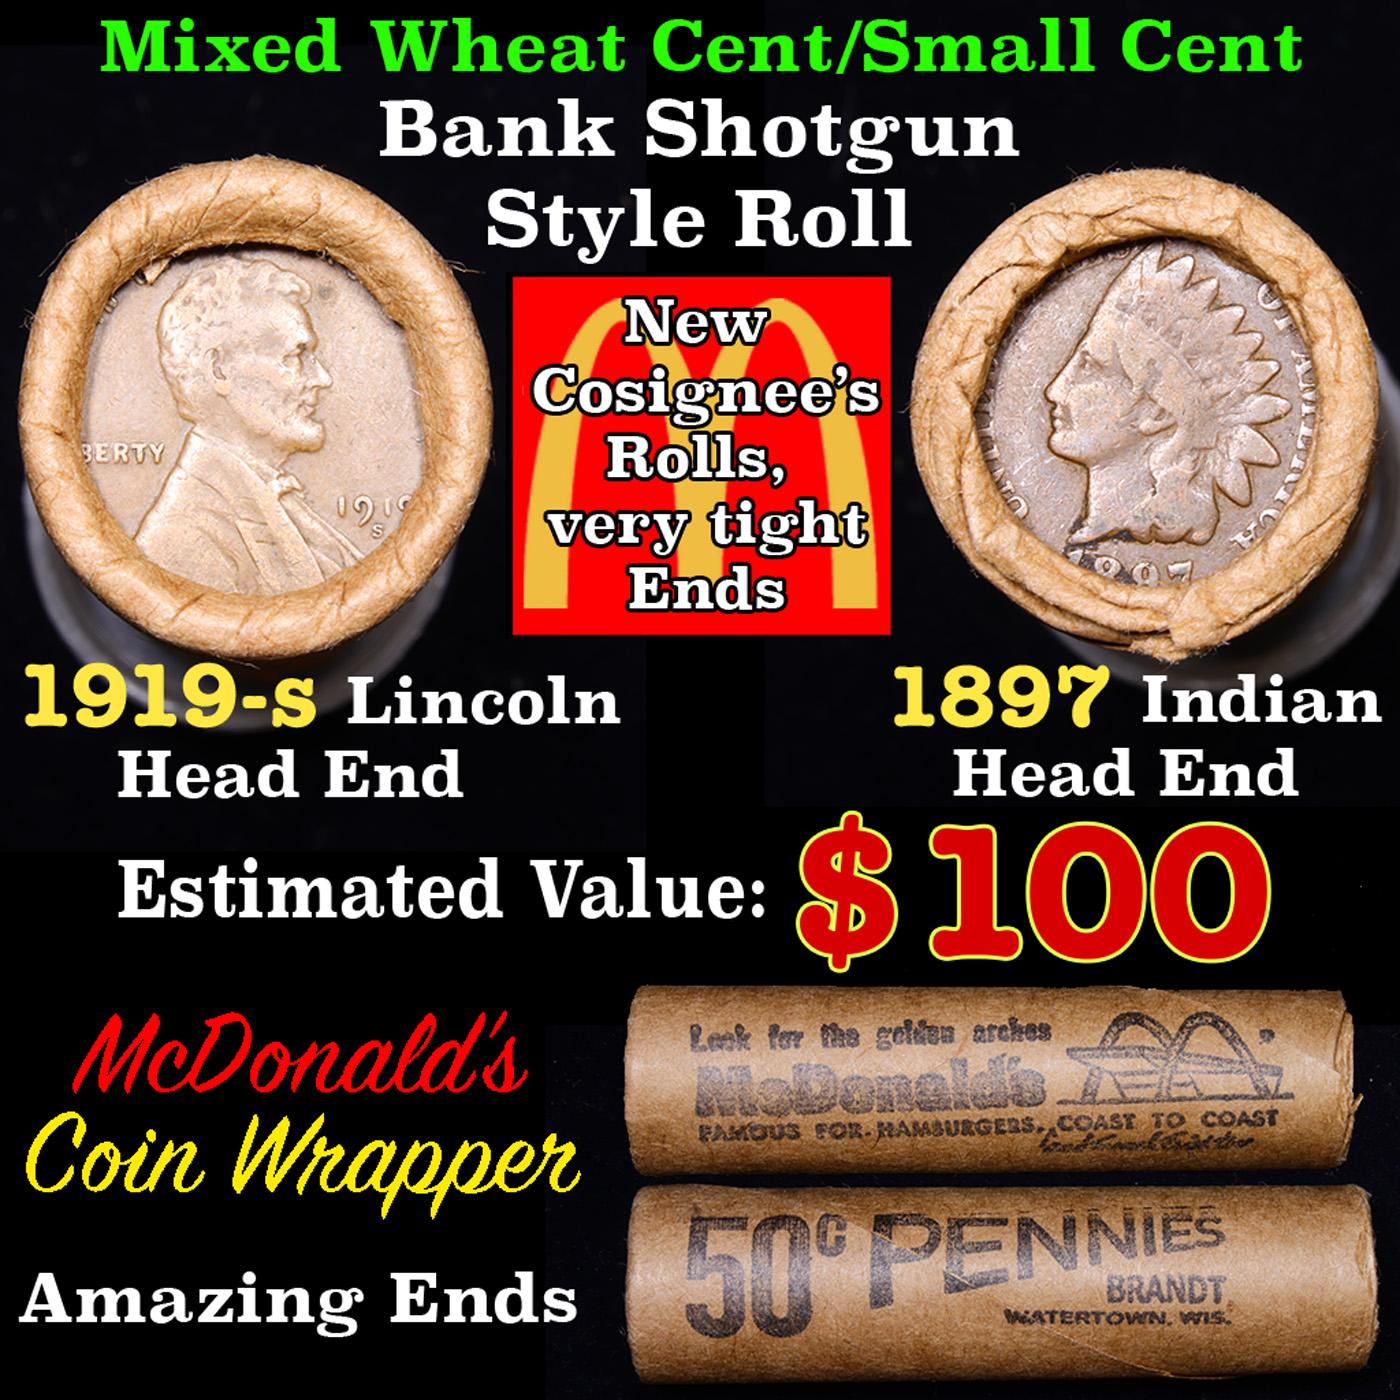 Mixed small cents 1c orig shotgun roll, 1919-s Wheat Cent, 1897 Indian Cent other end, McDonalds Wra